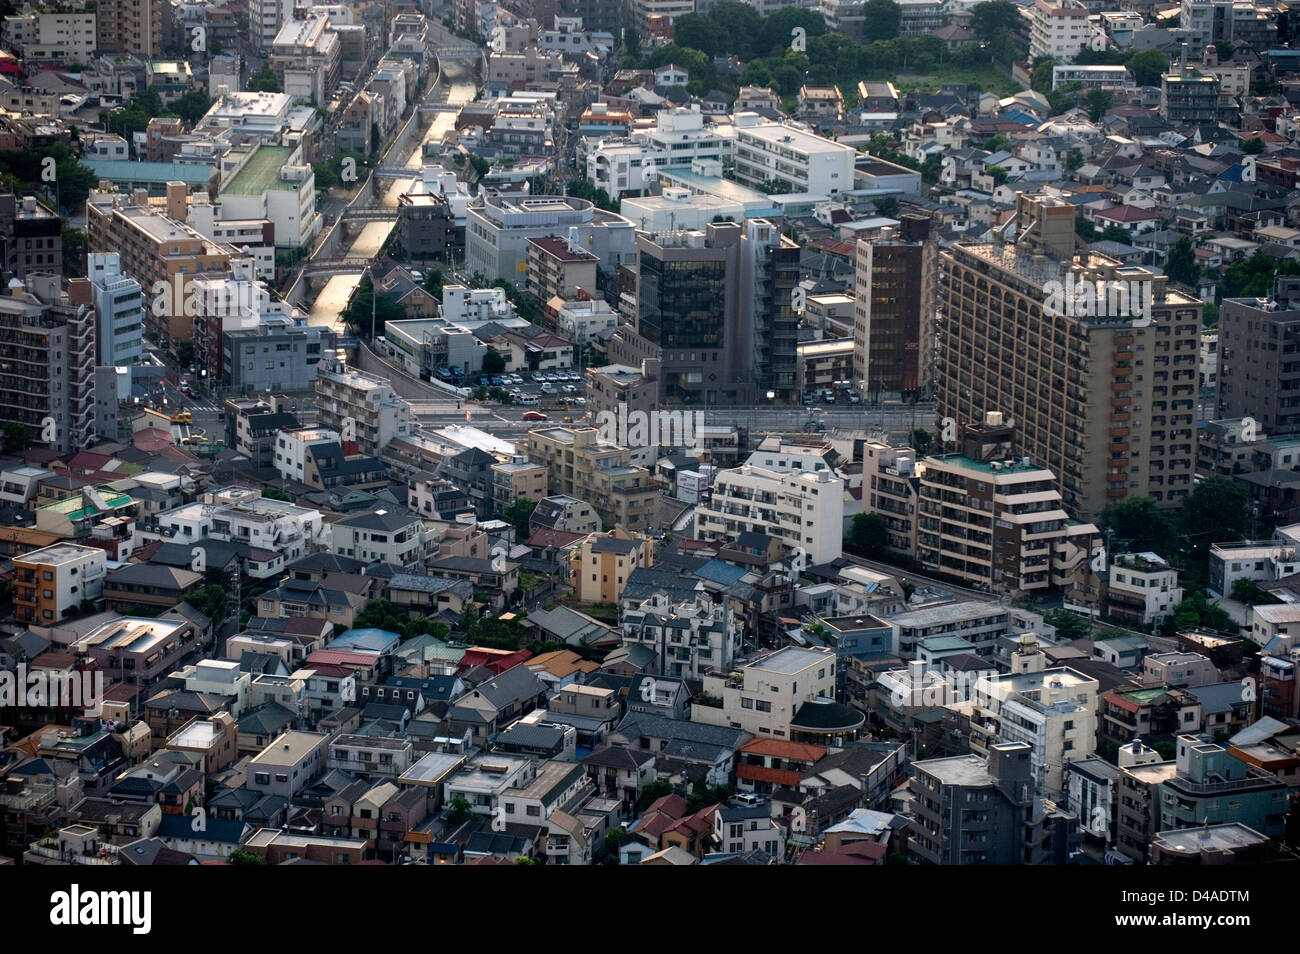 Aerial view of a Tokyo city neighborhood depicting over-crowding, urban sprawl and development. Stock Photo